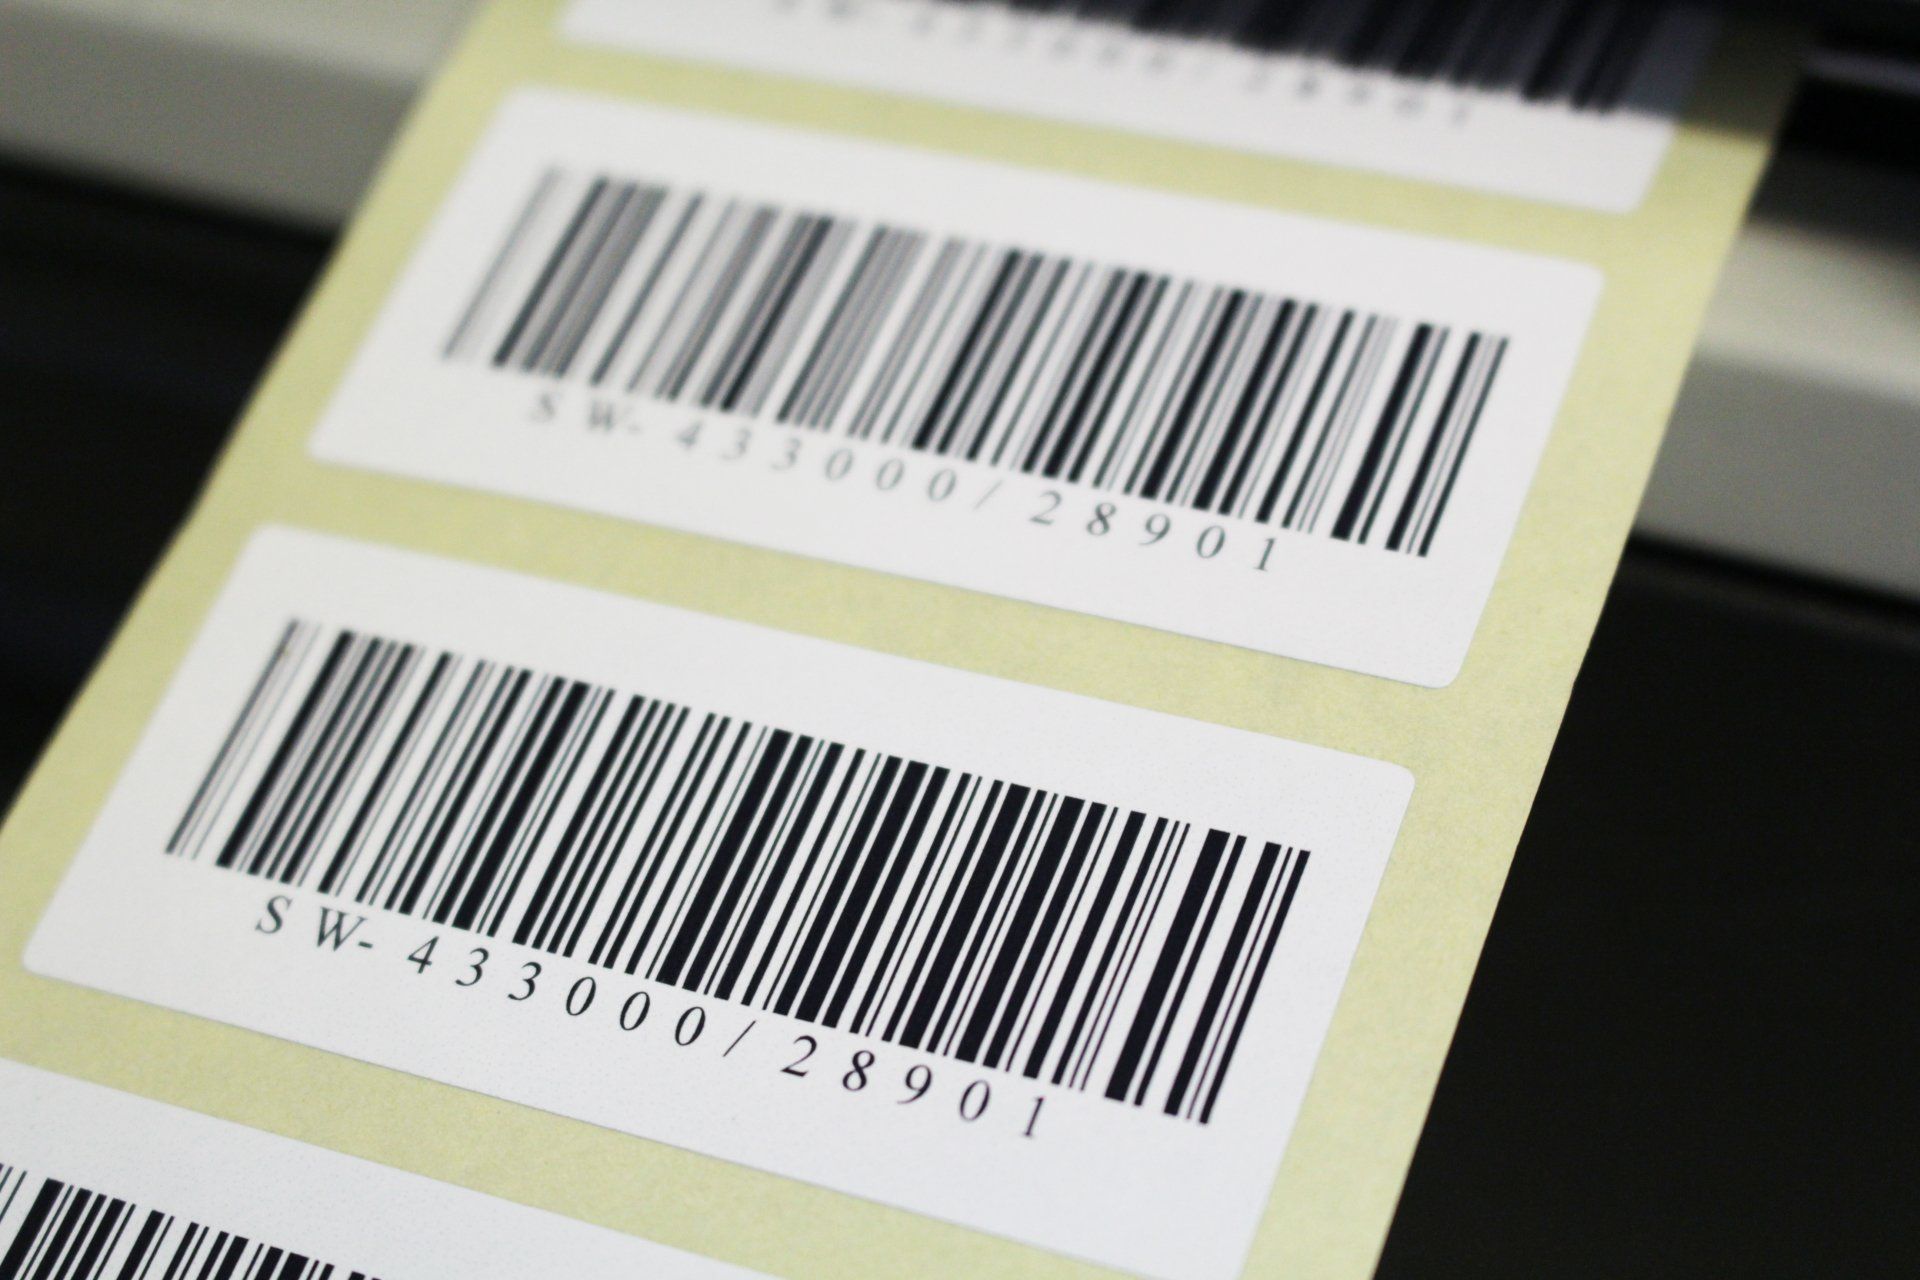 BARCODE LABELS